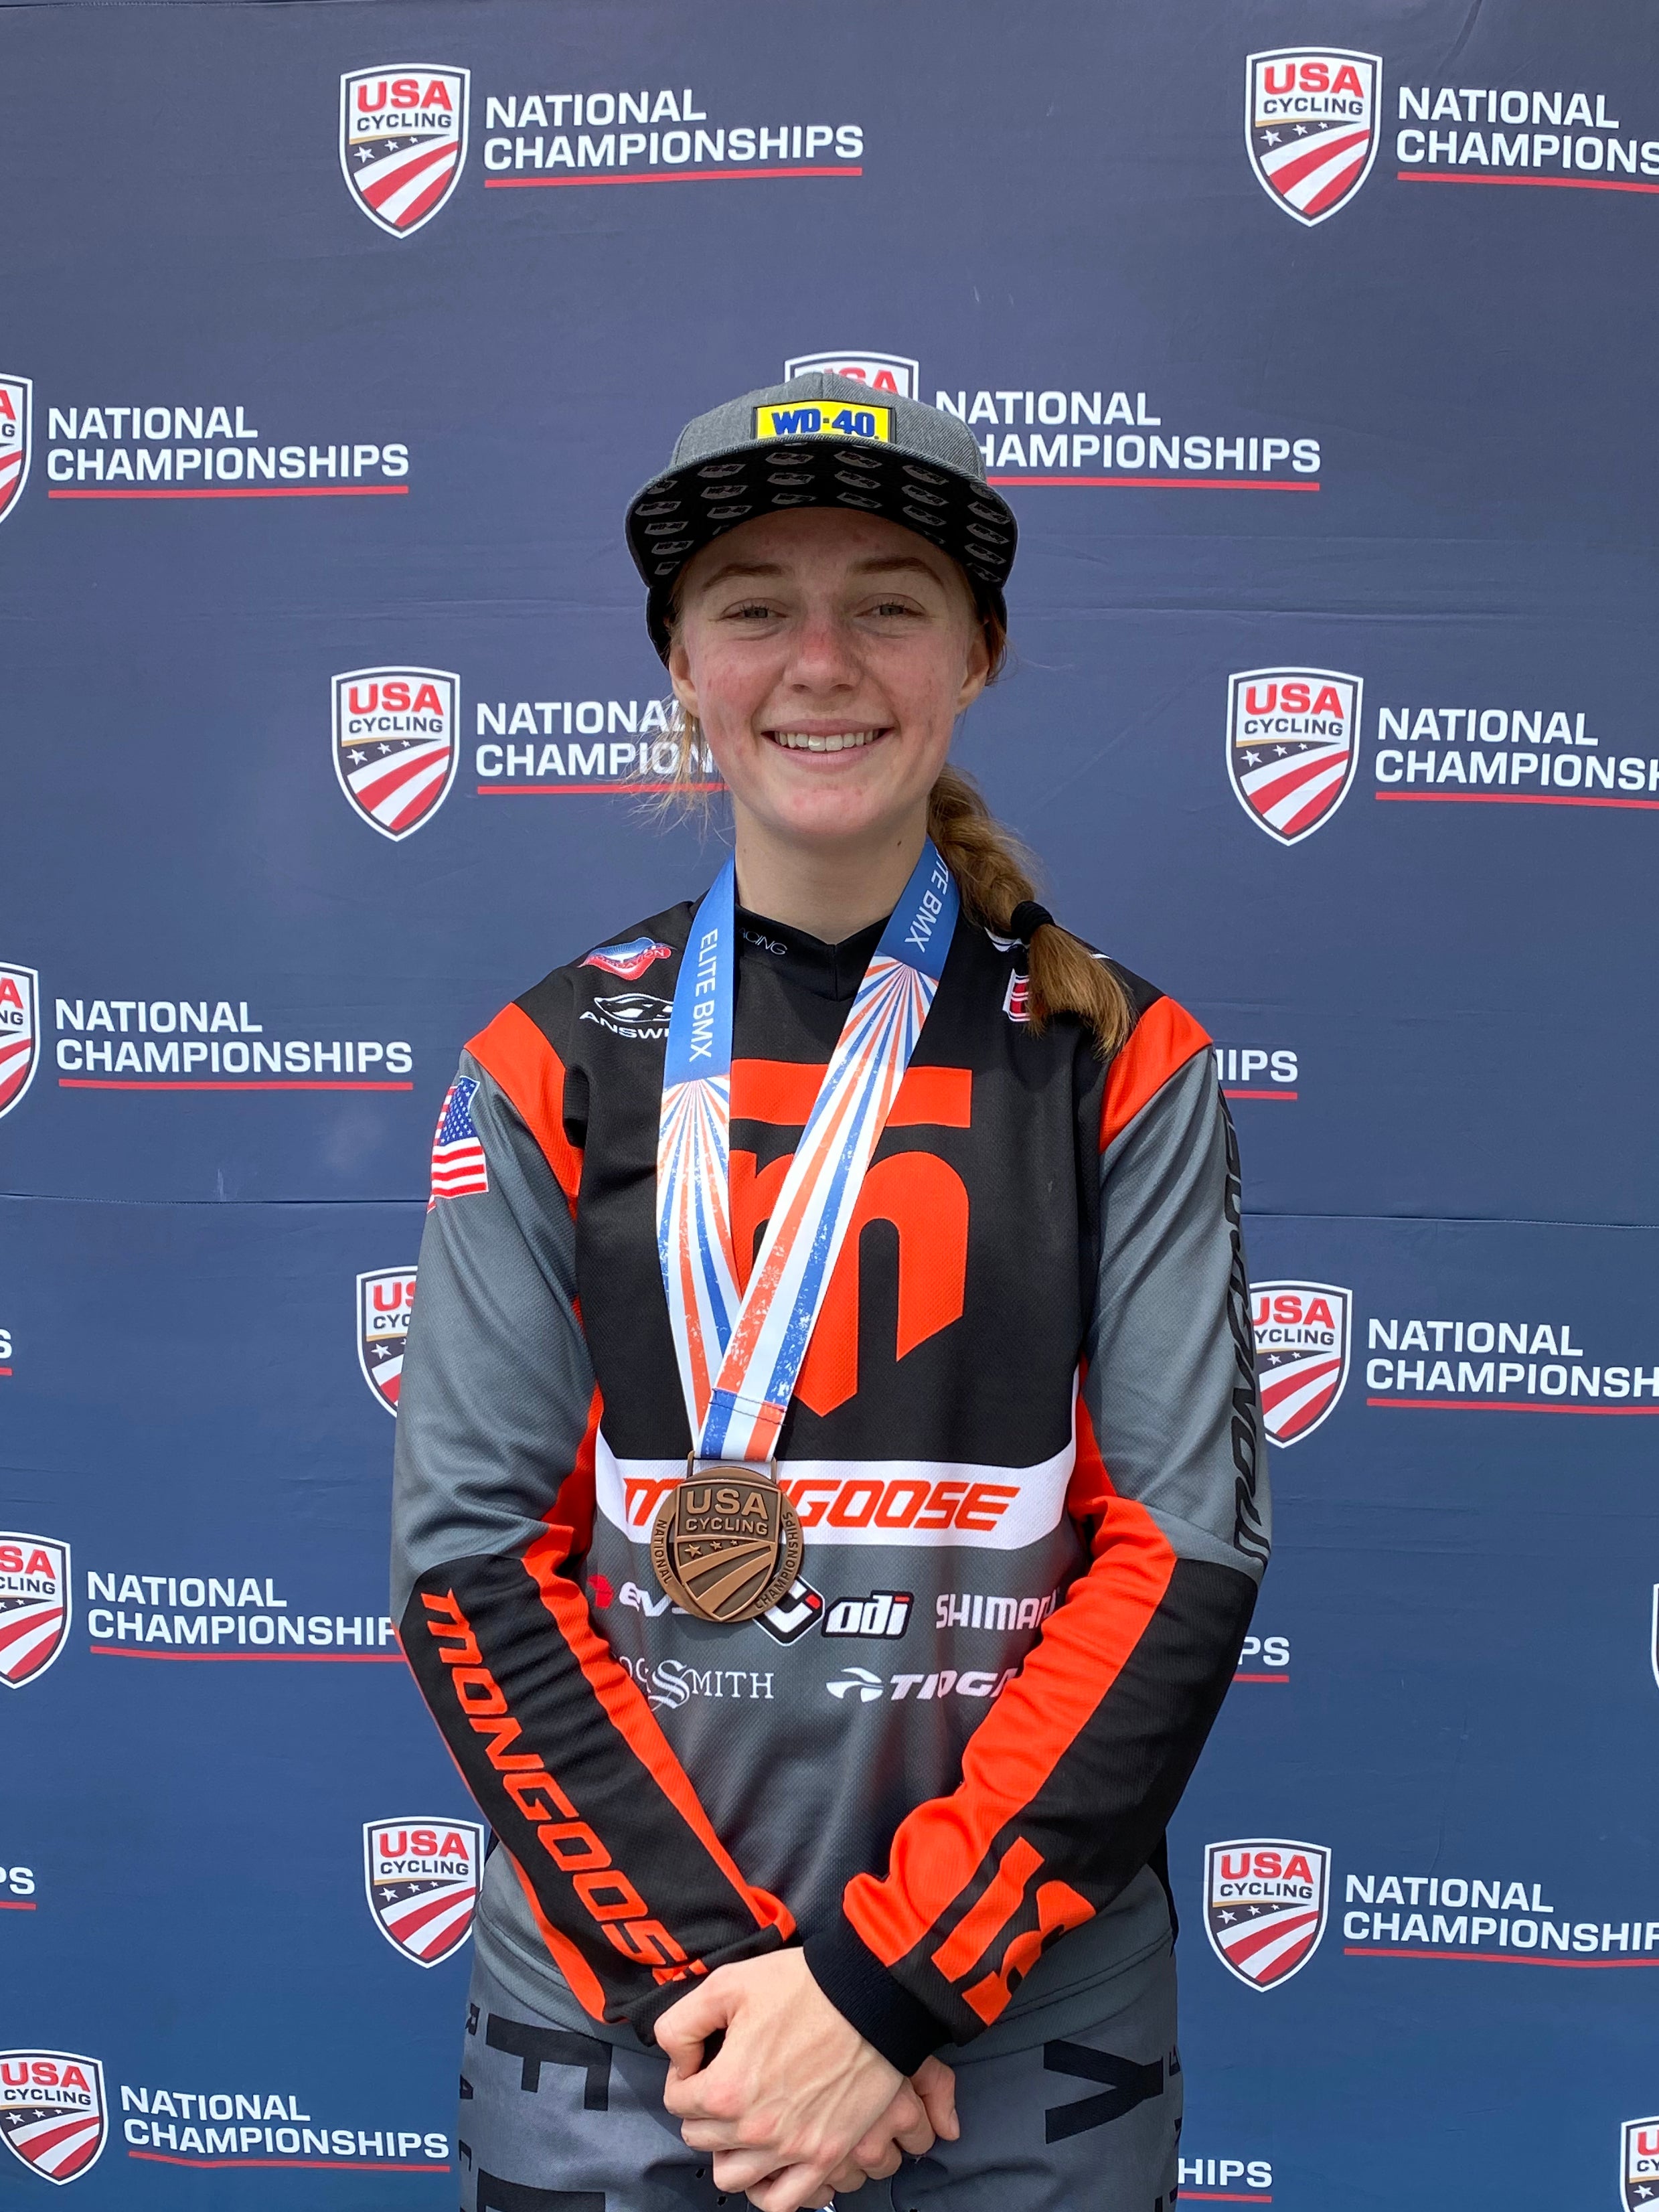 P-Nut takes 3rd at Rock Hill Nationals